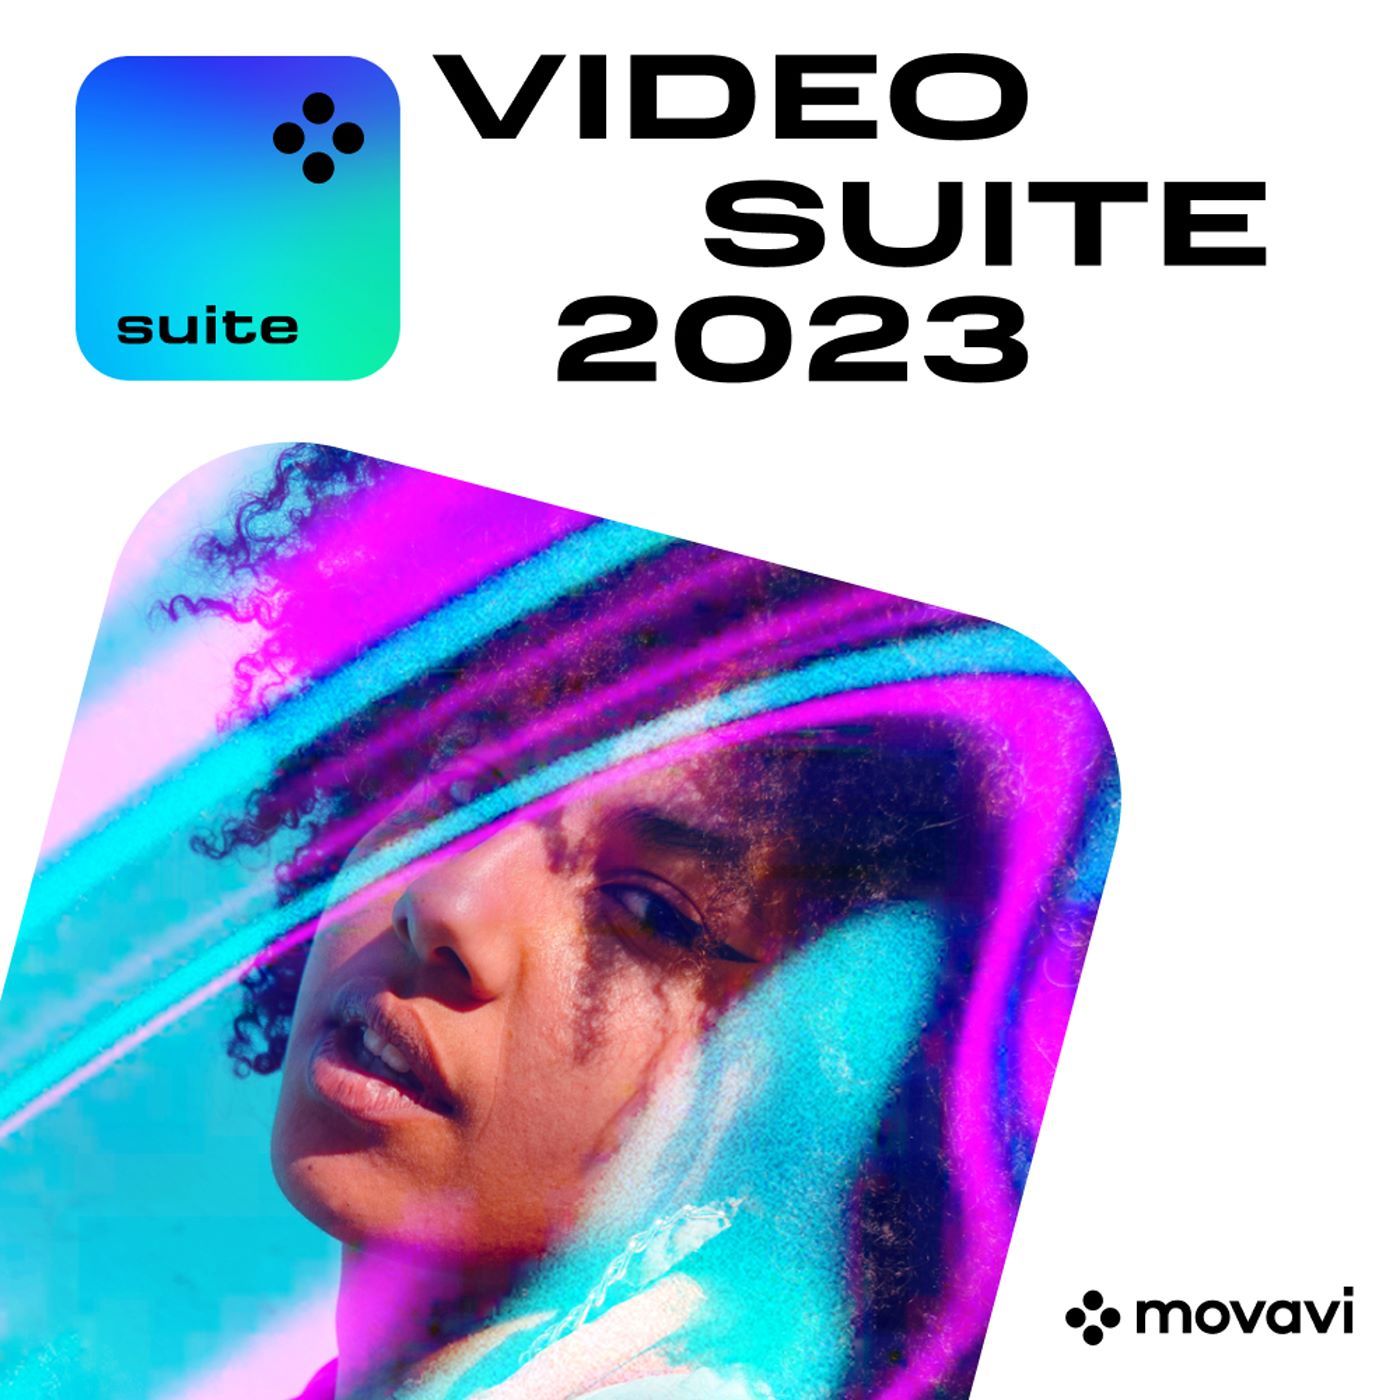 Movavi Video Suite - an all-in-one Movie Maker